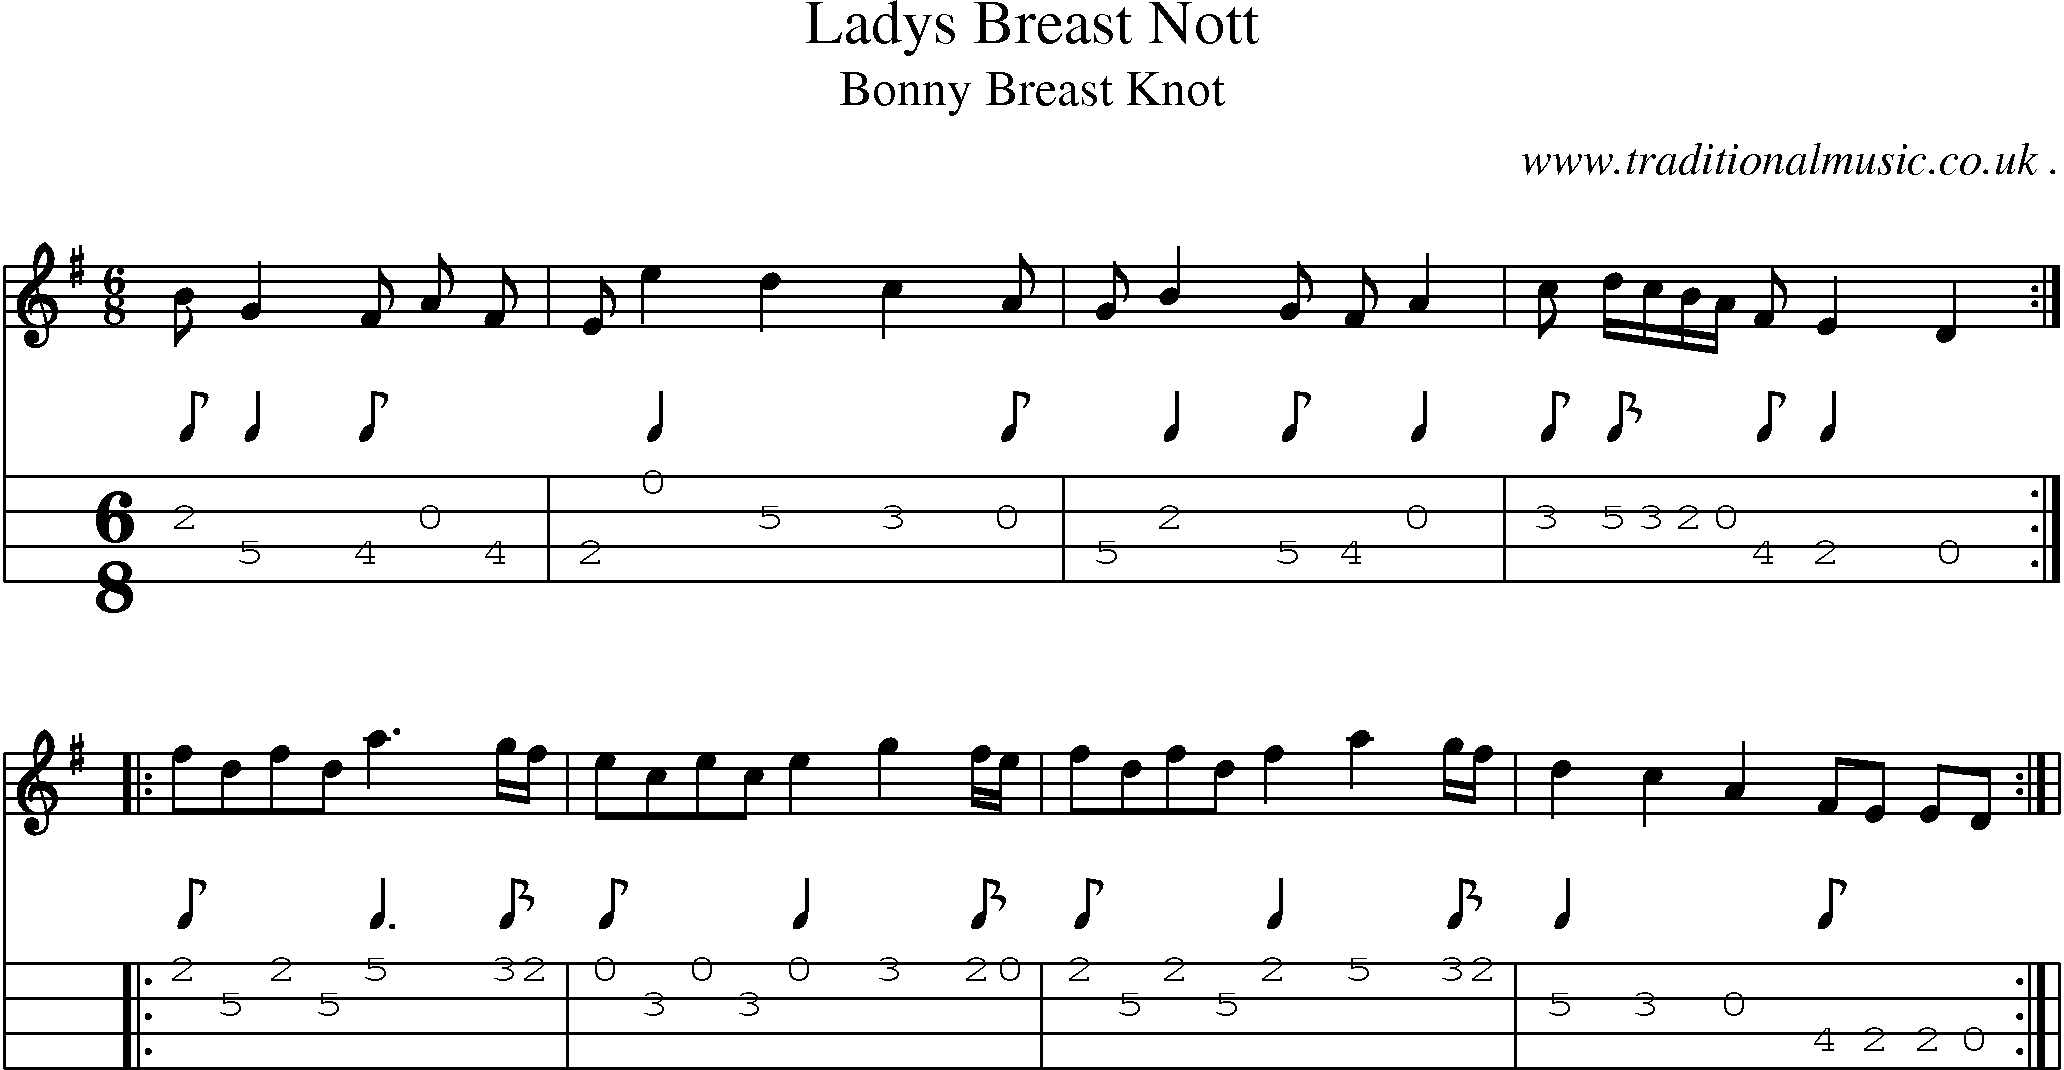 Sheet-Music and Mandolin Tabs for Ladys Breast Nott